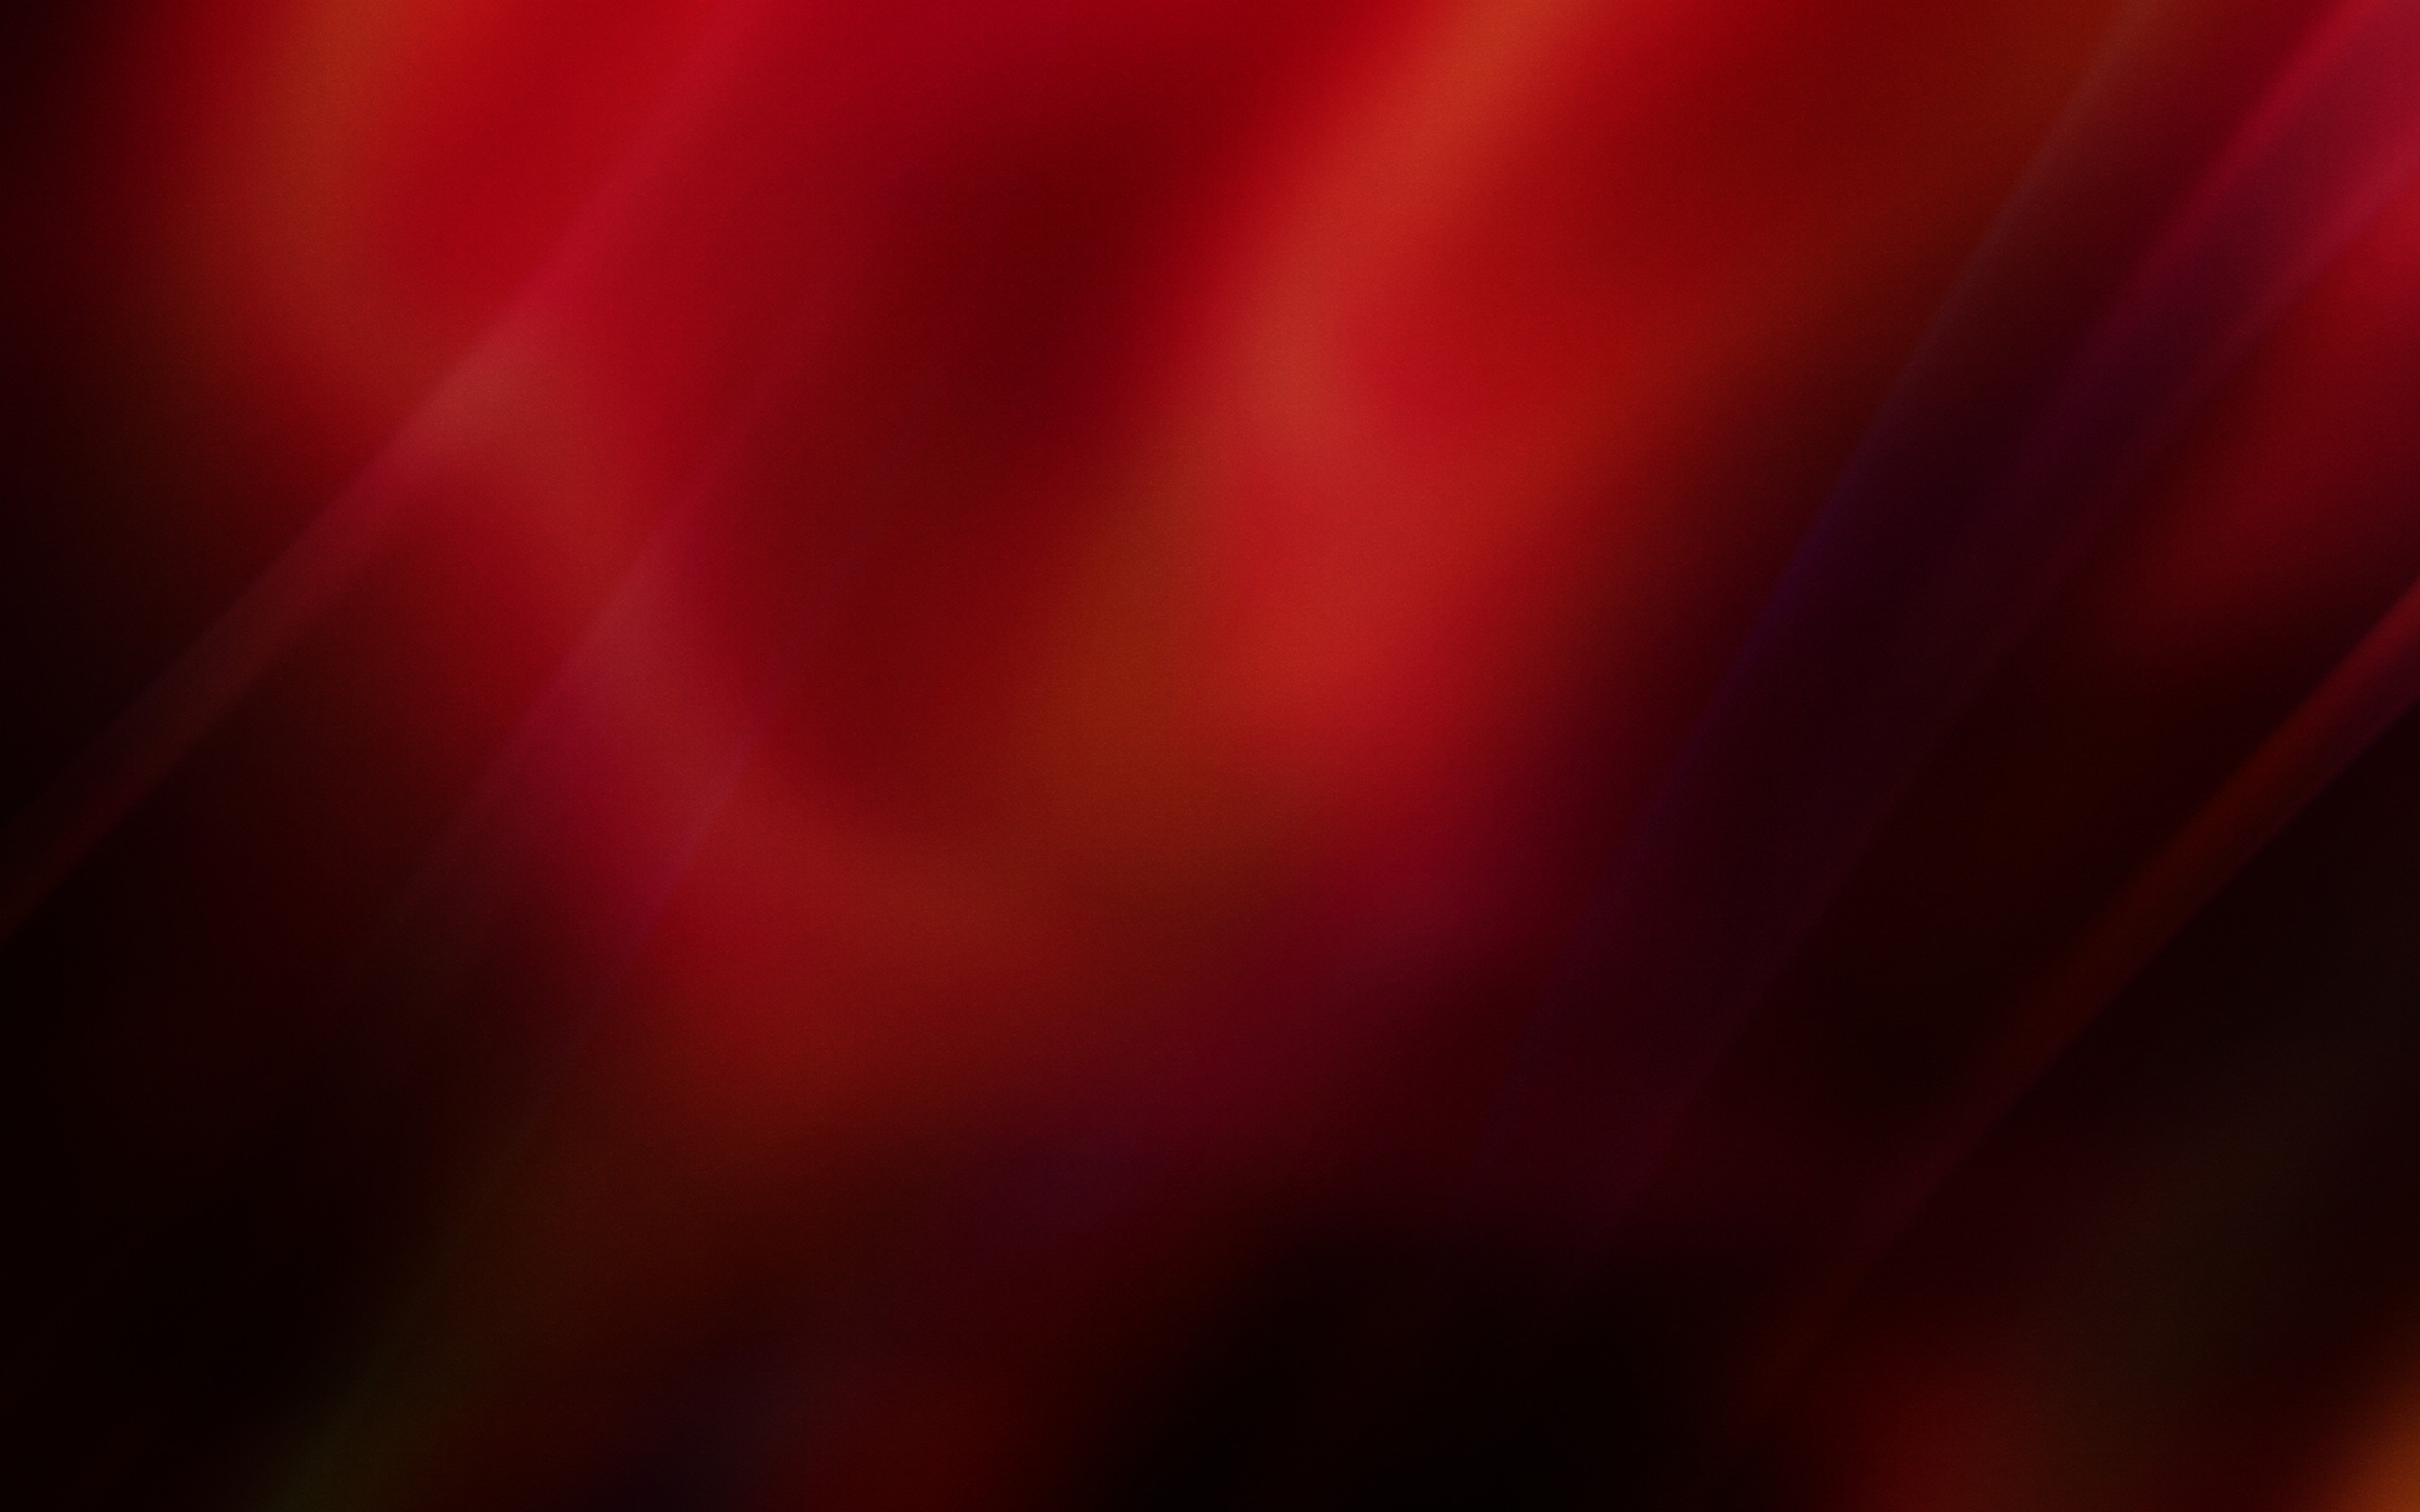 2560x1600 Red And Black Hd Wallpapers For Mac #2878